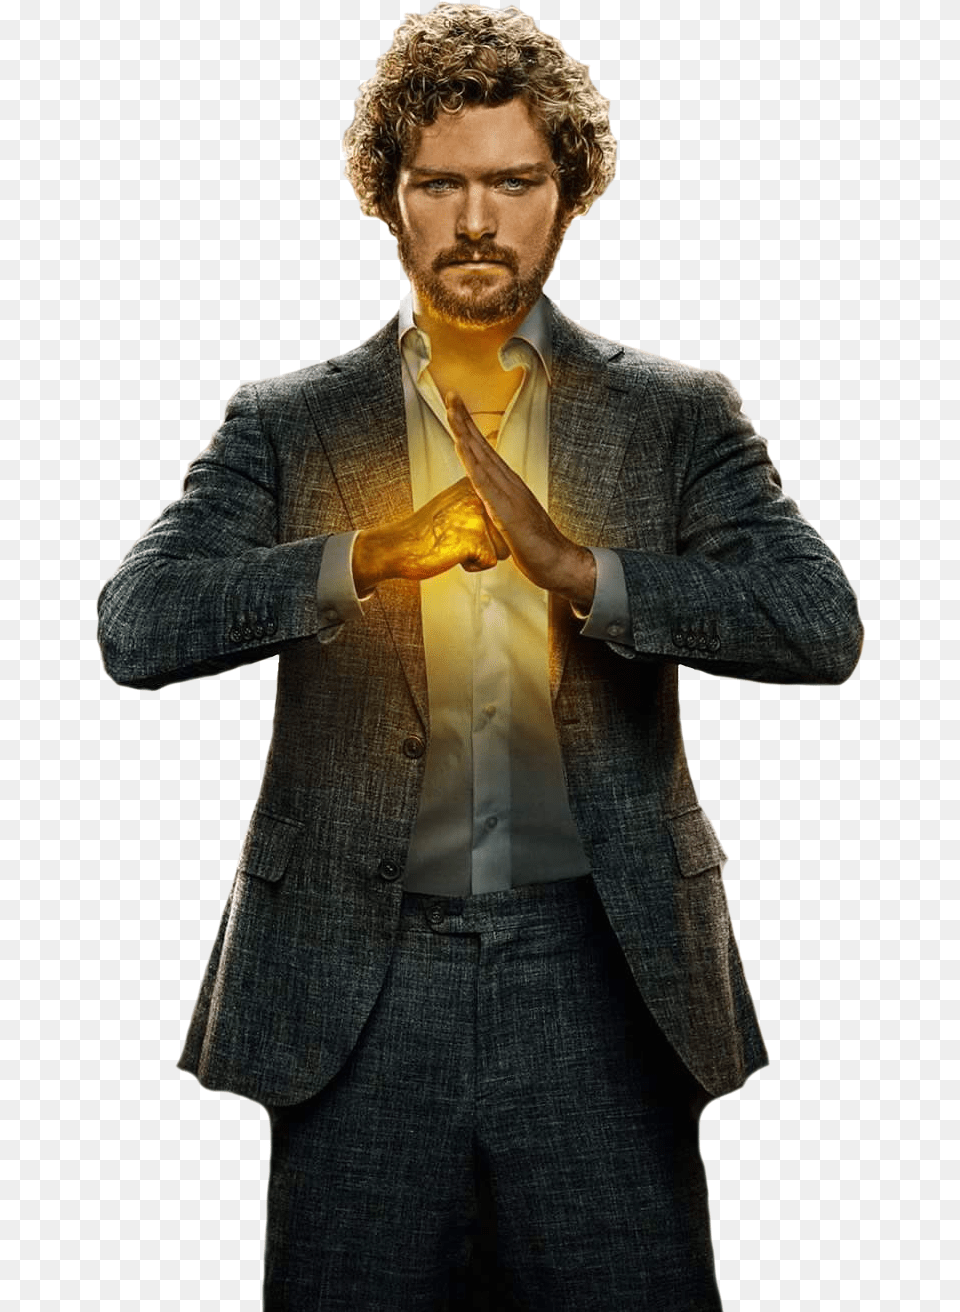 Home To Transparent Superheroes Finn Jones As Iron Luke Cage Season 2 Iron Fist, Accessories, Suit, Jacket, Formal Wear Png